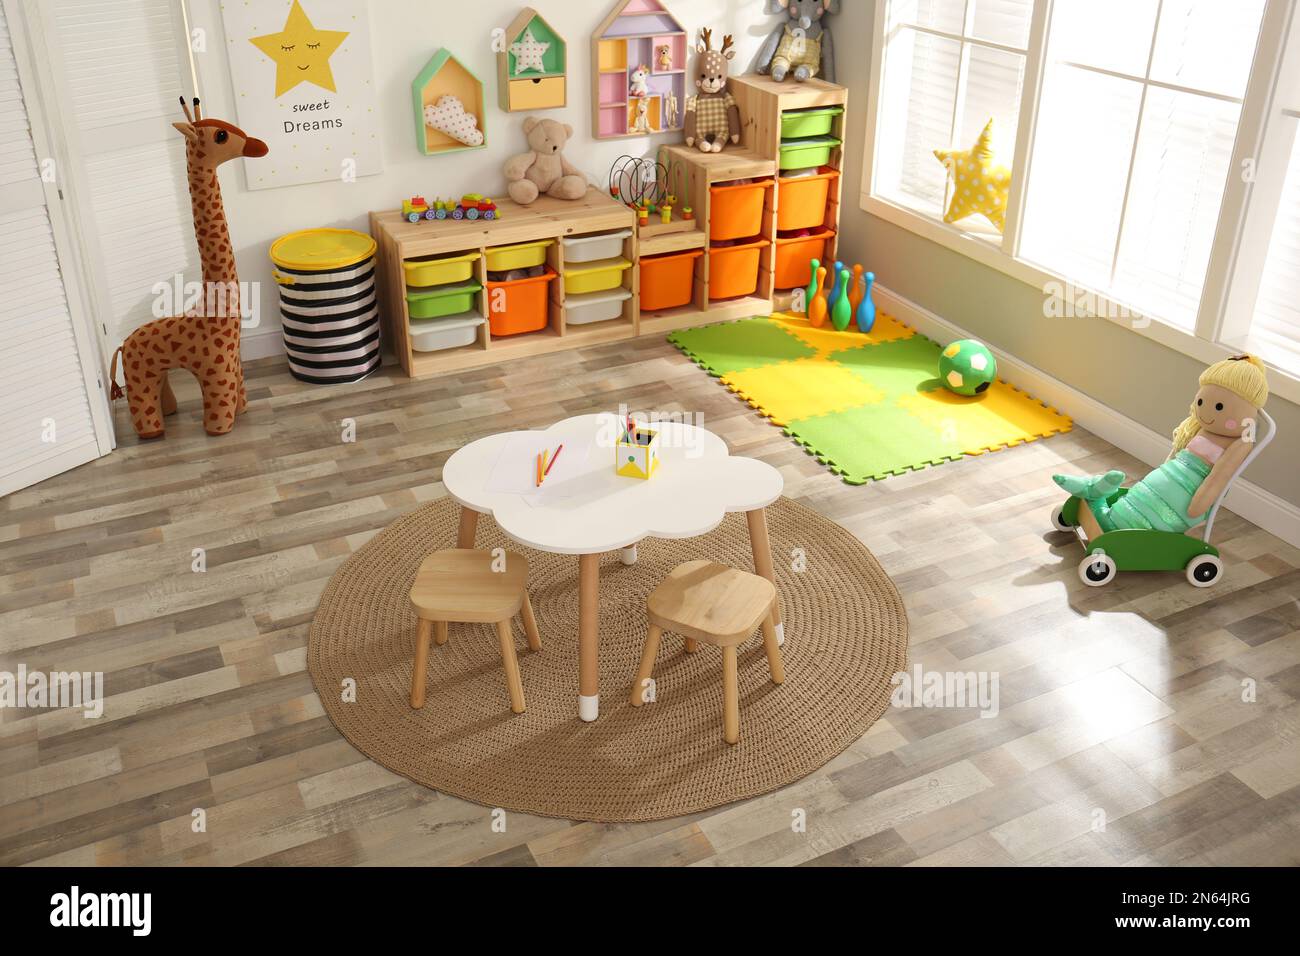 Stylish playroom interior with modern furniture and soft toys, above view Stock Photo